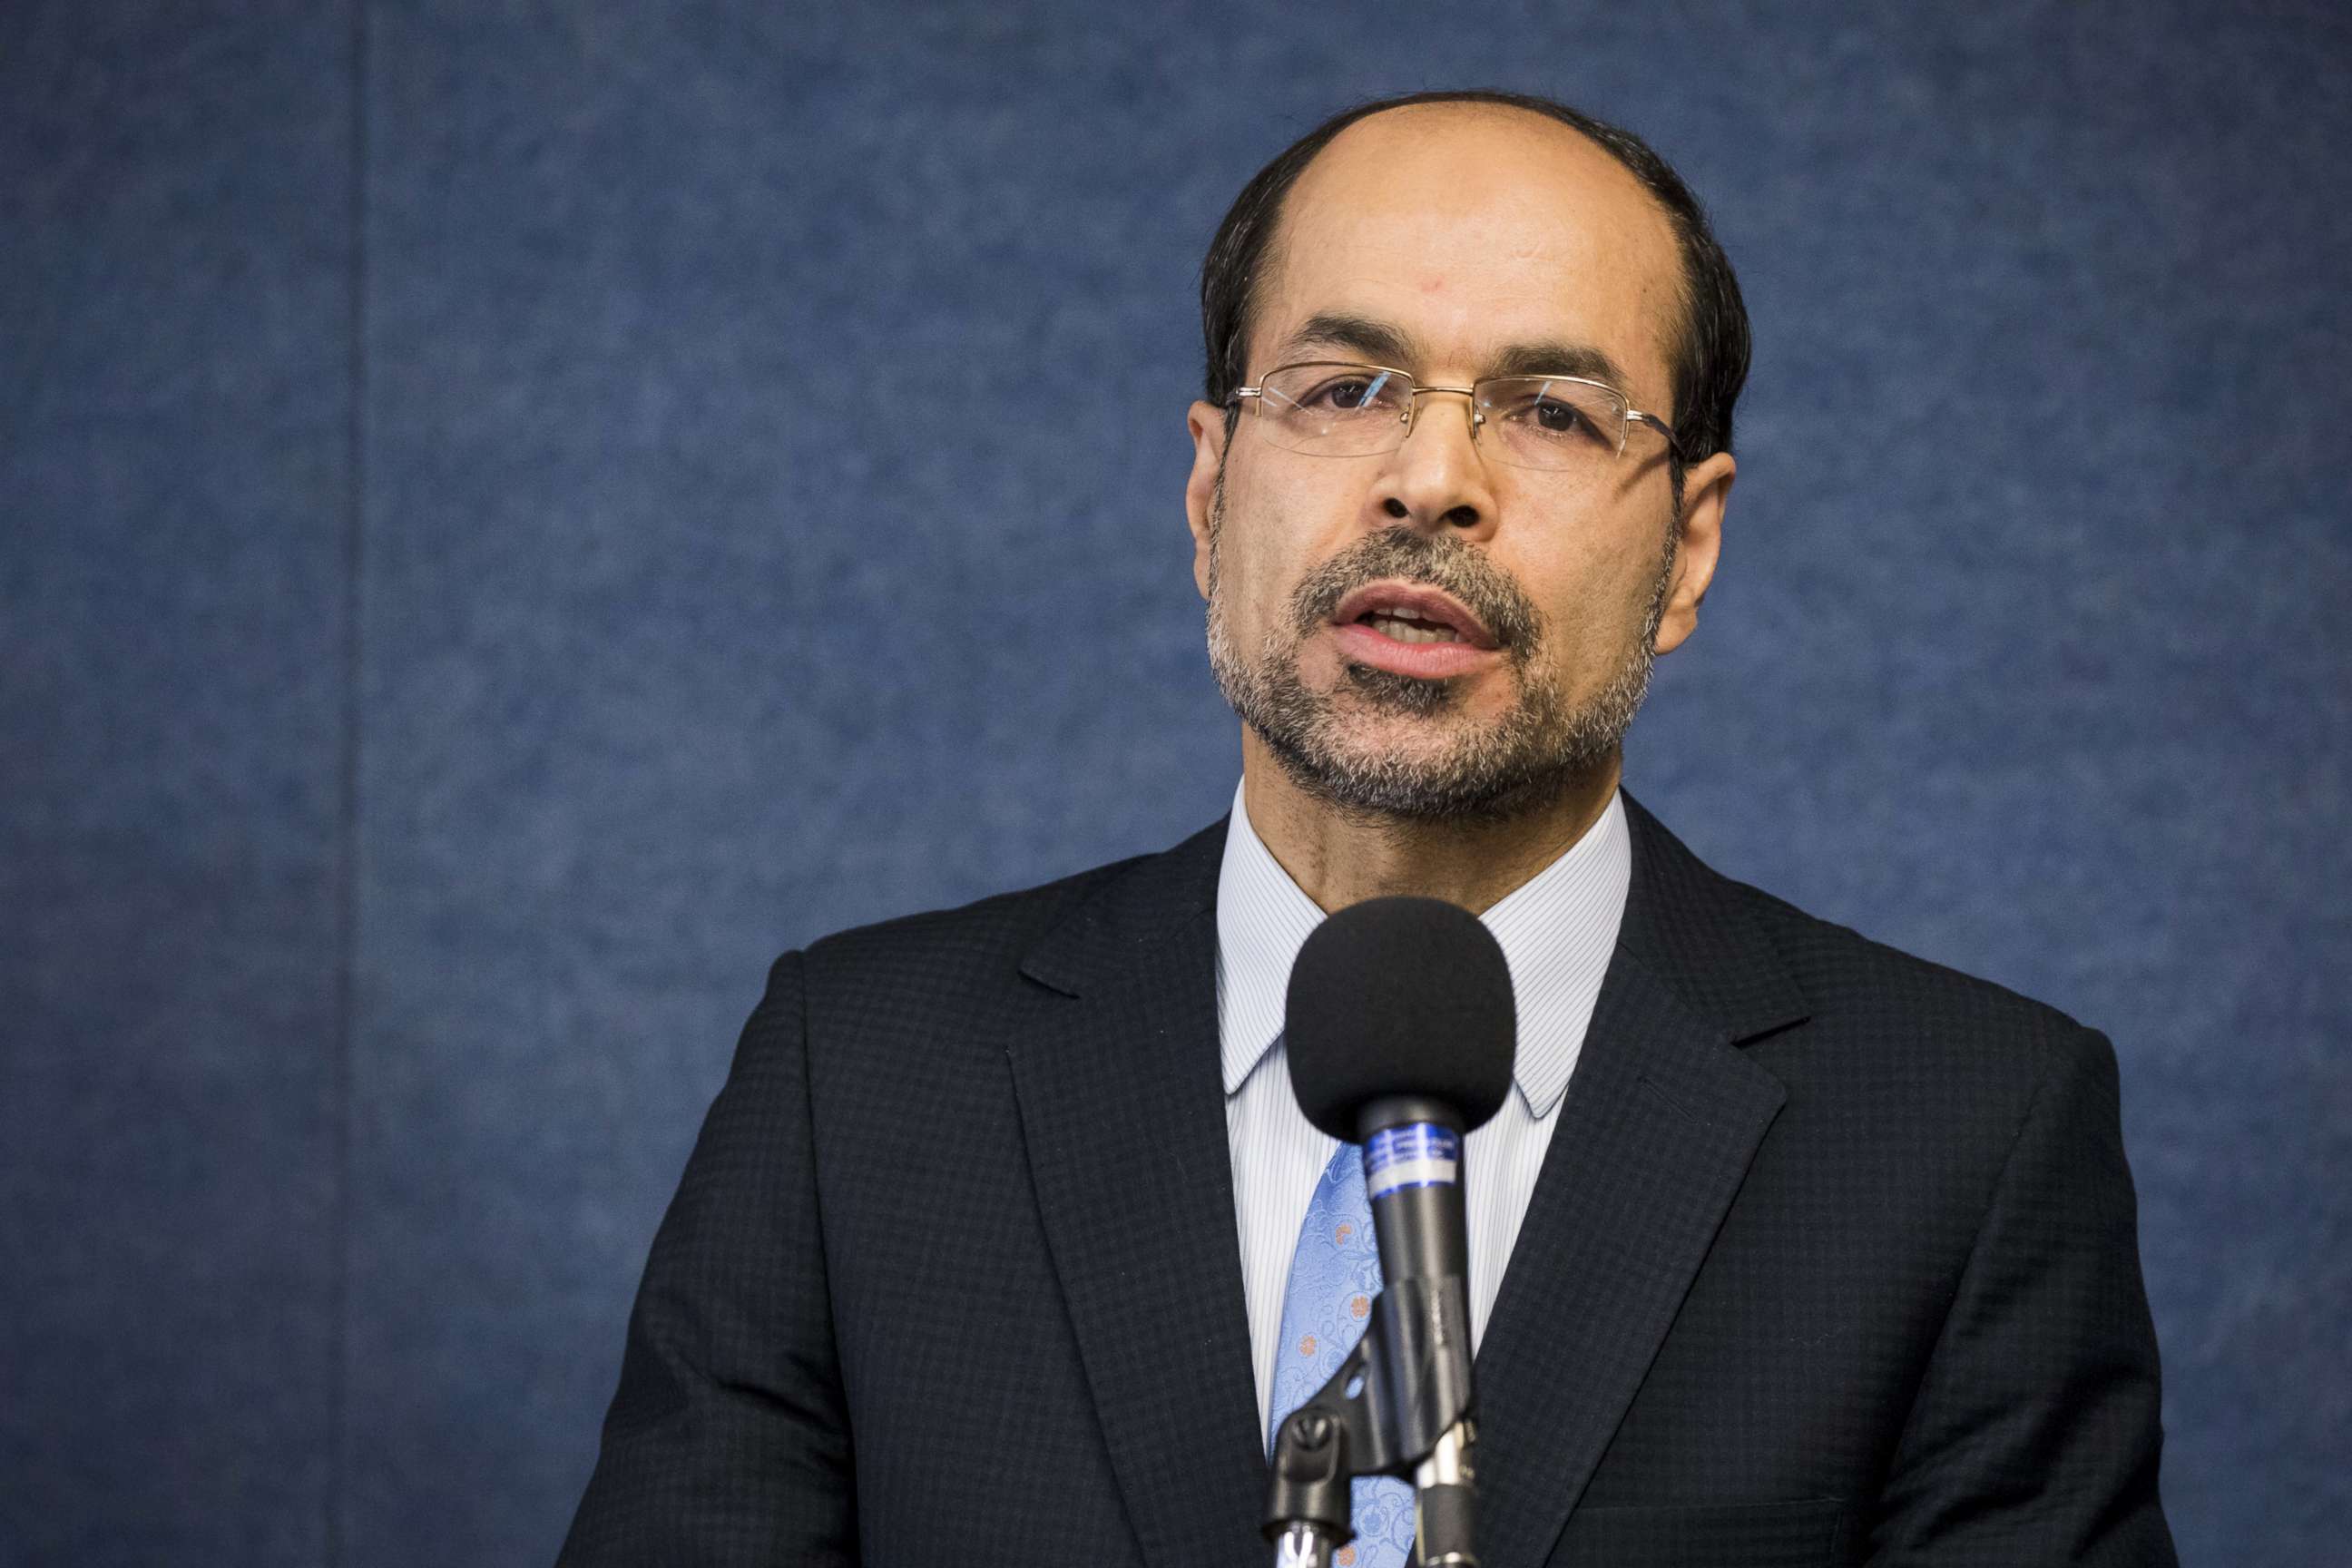 PHOTO: Nihad Awad, Executive Director of the Council on American-Islamic Relations, speaks at the National Press Club in Washington, DC, Dec. 5, 2017.